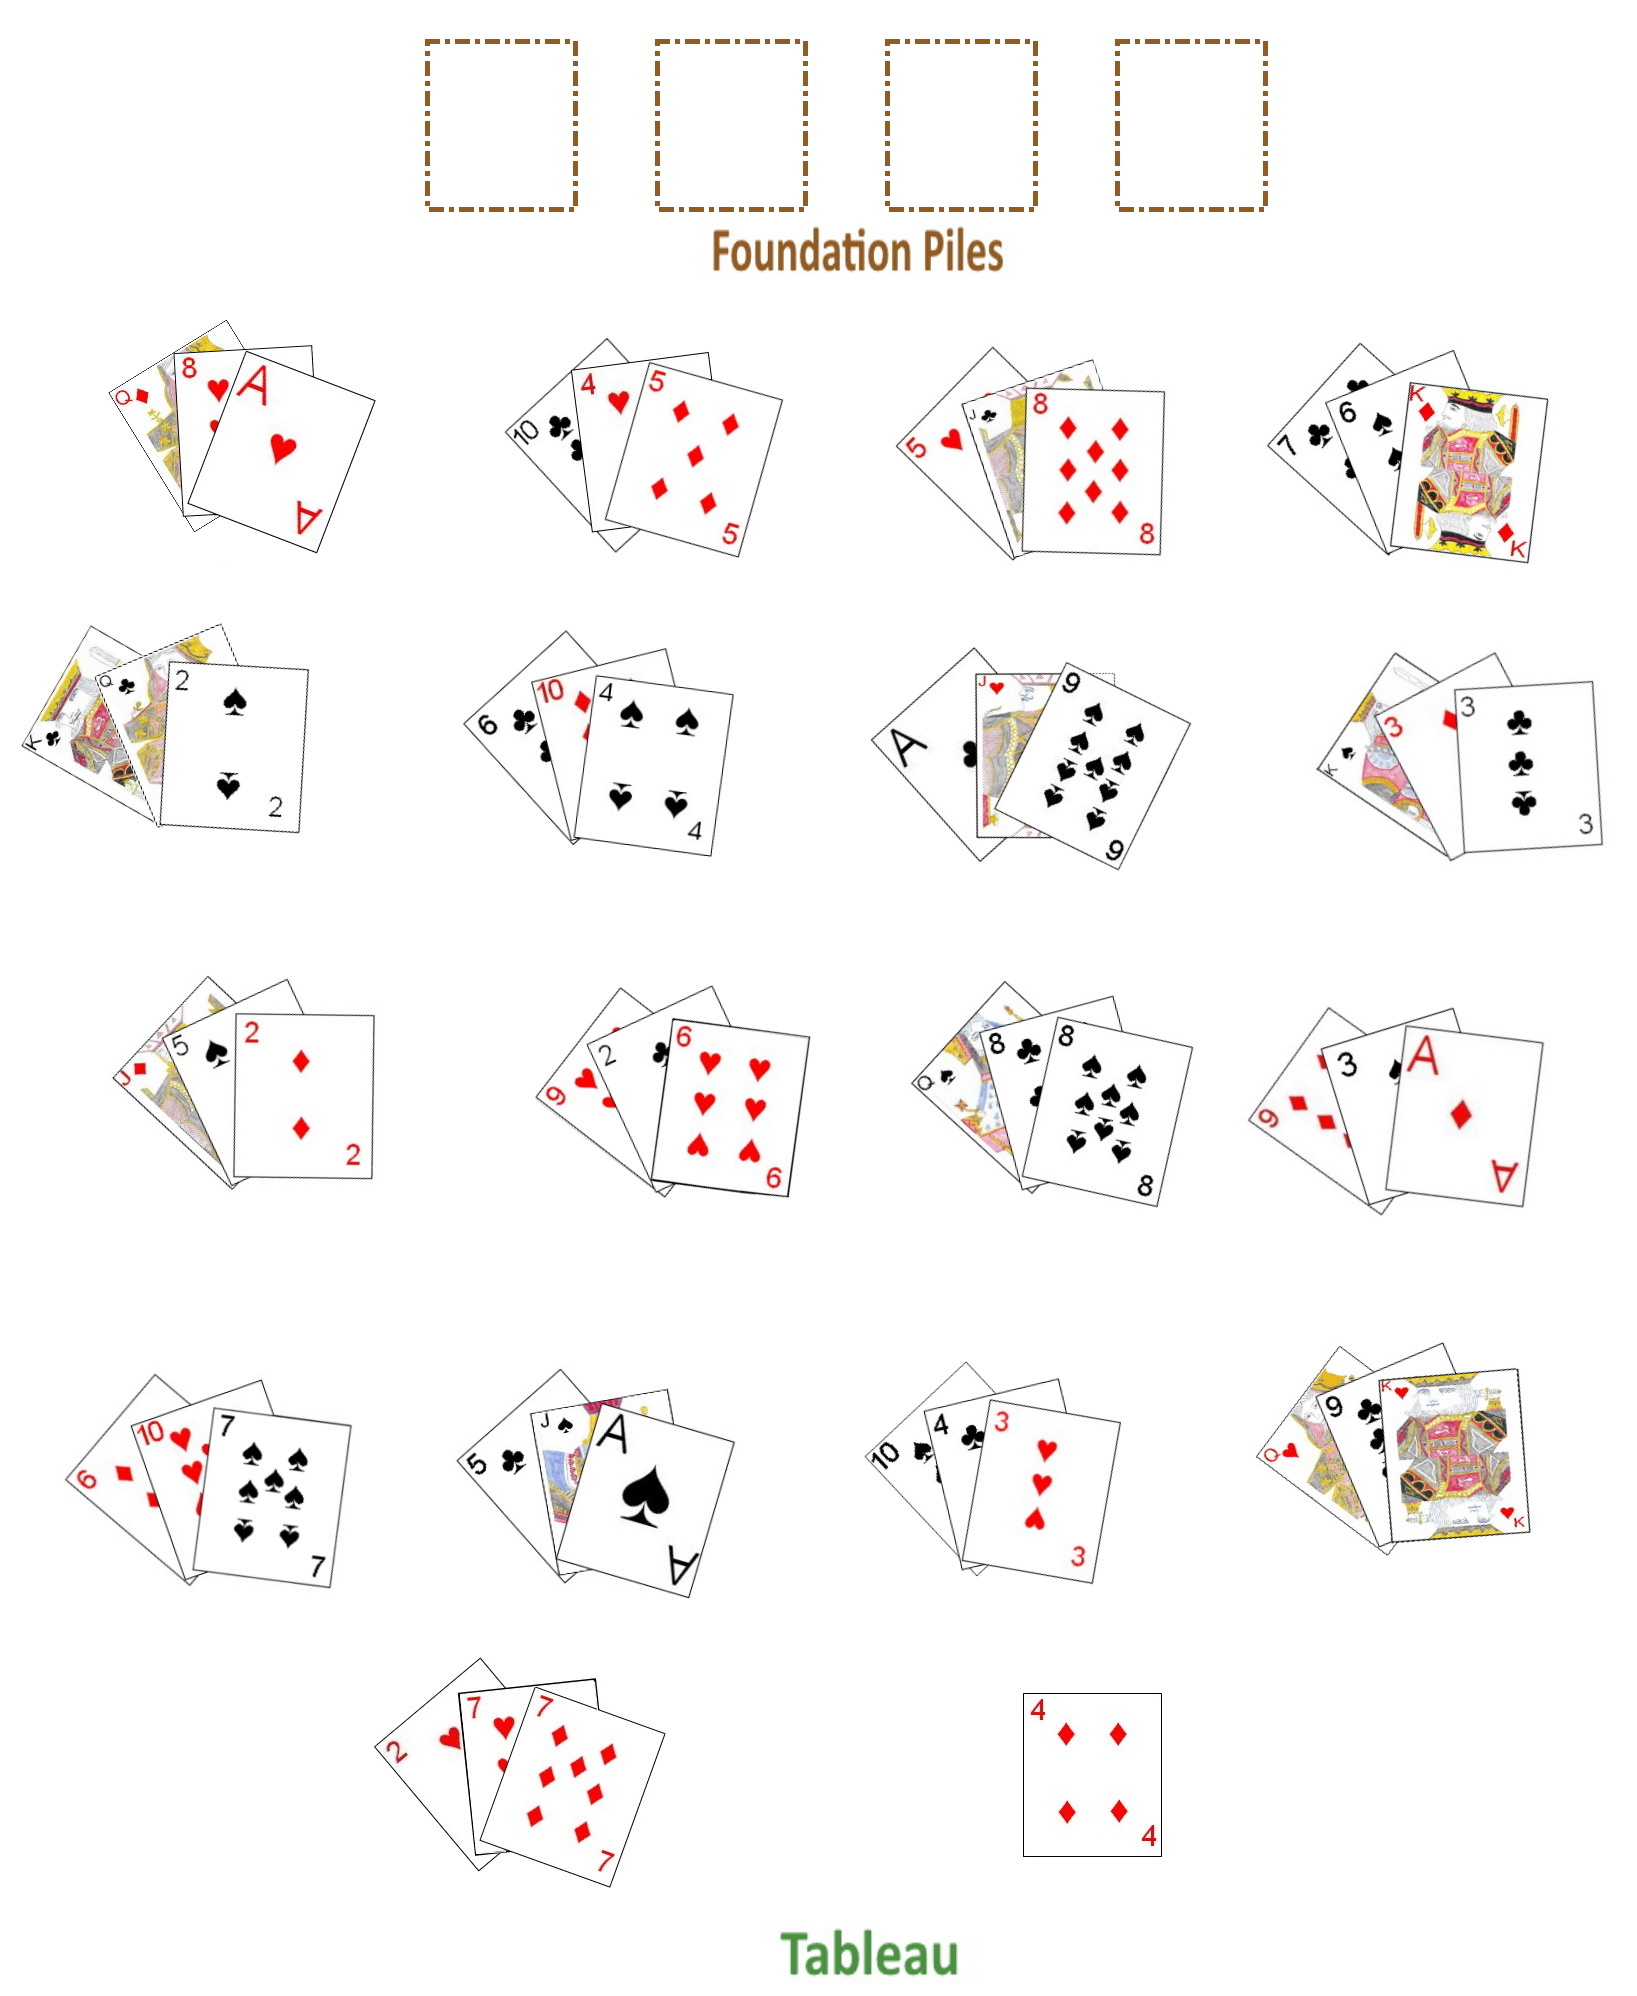 Example inital setup for La Belle Lucie solitaire